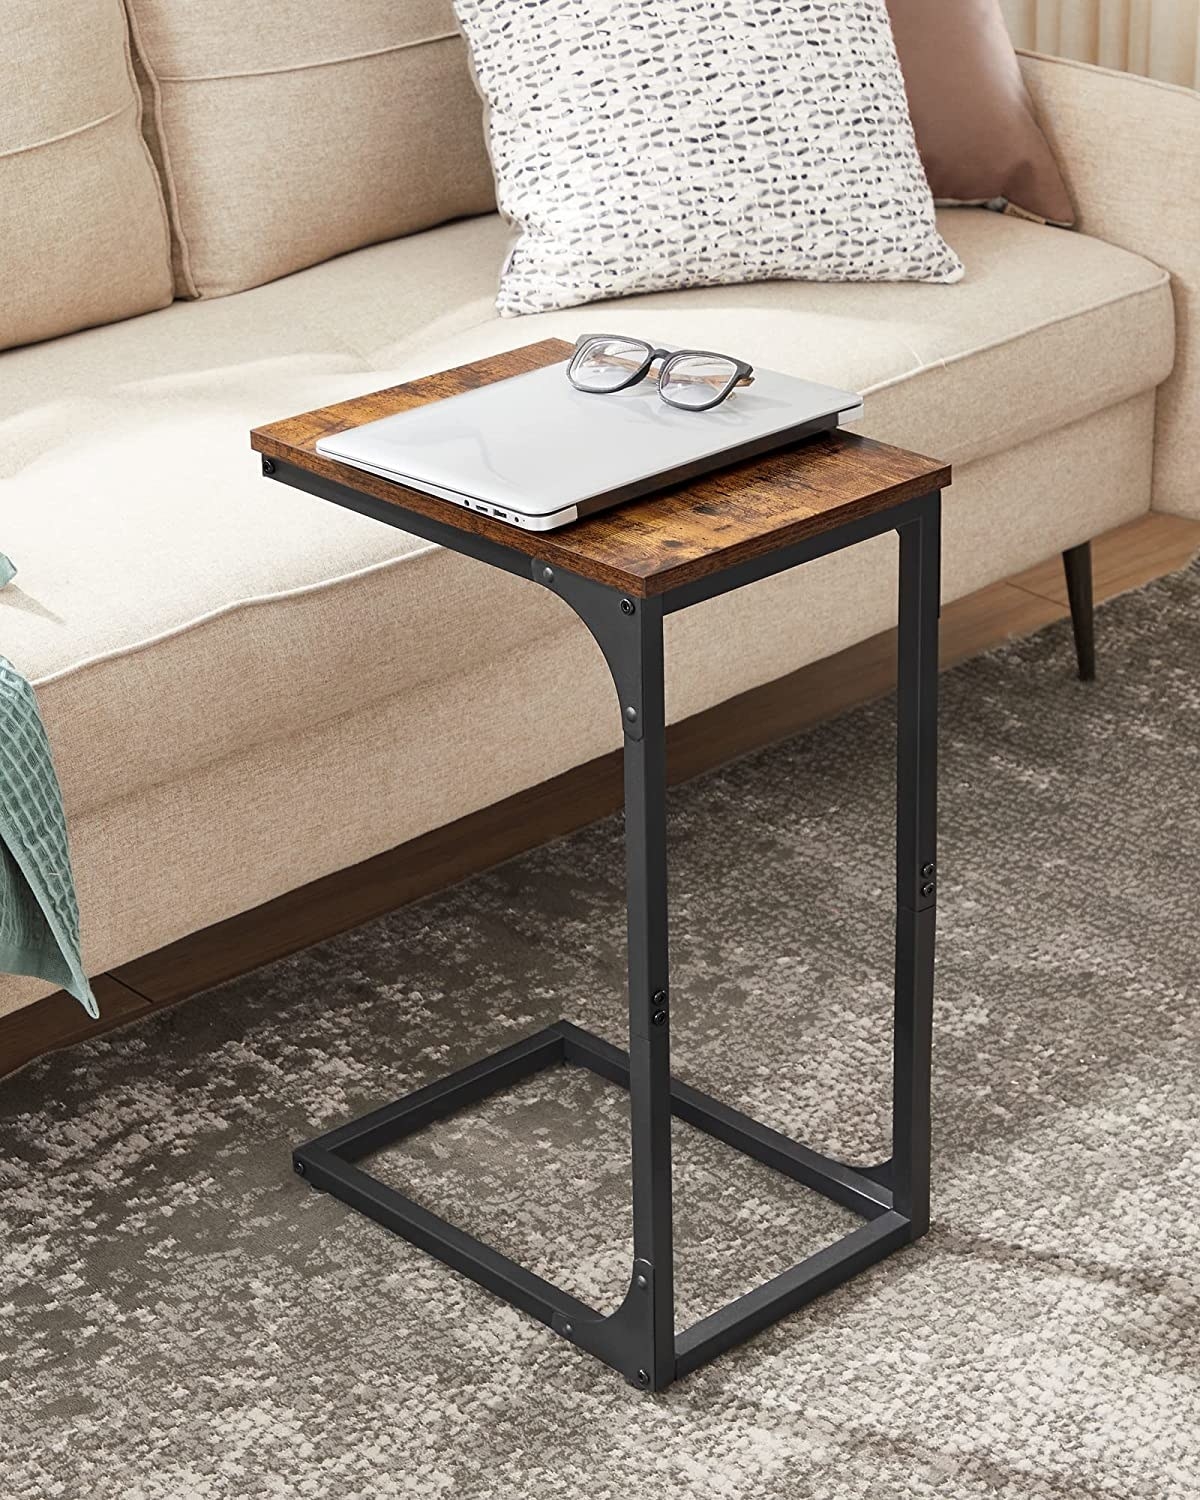 a side table with a laptop on it